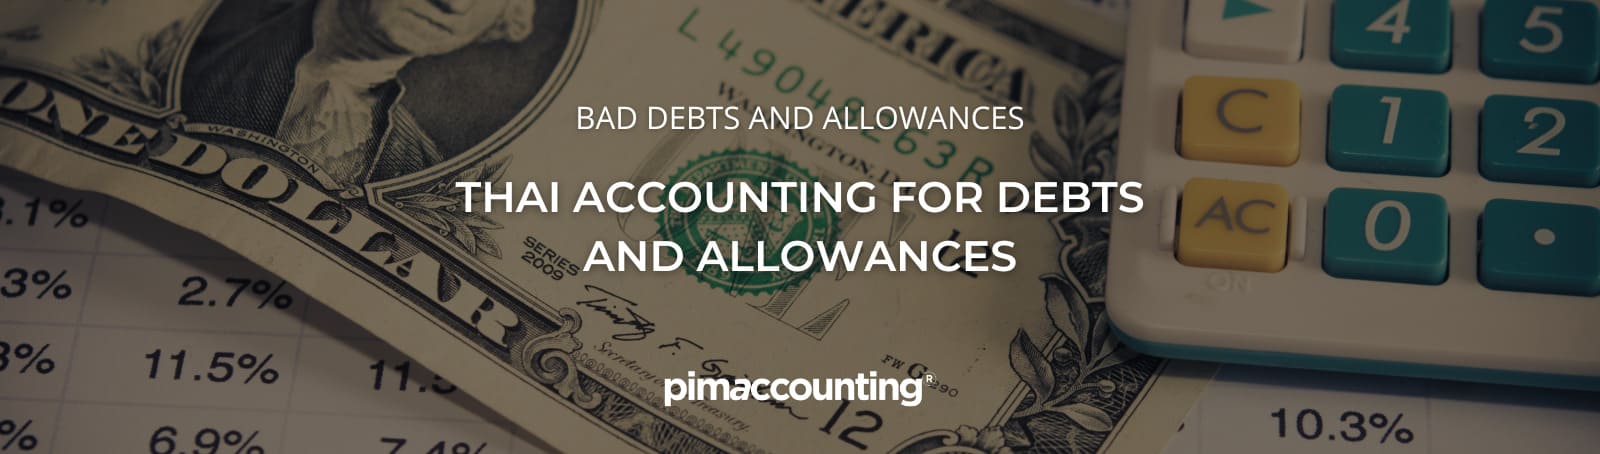 Thai Accounting for Bad Debts and Allowances